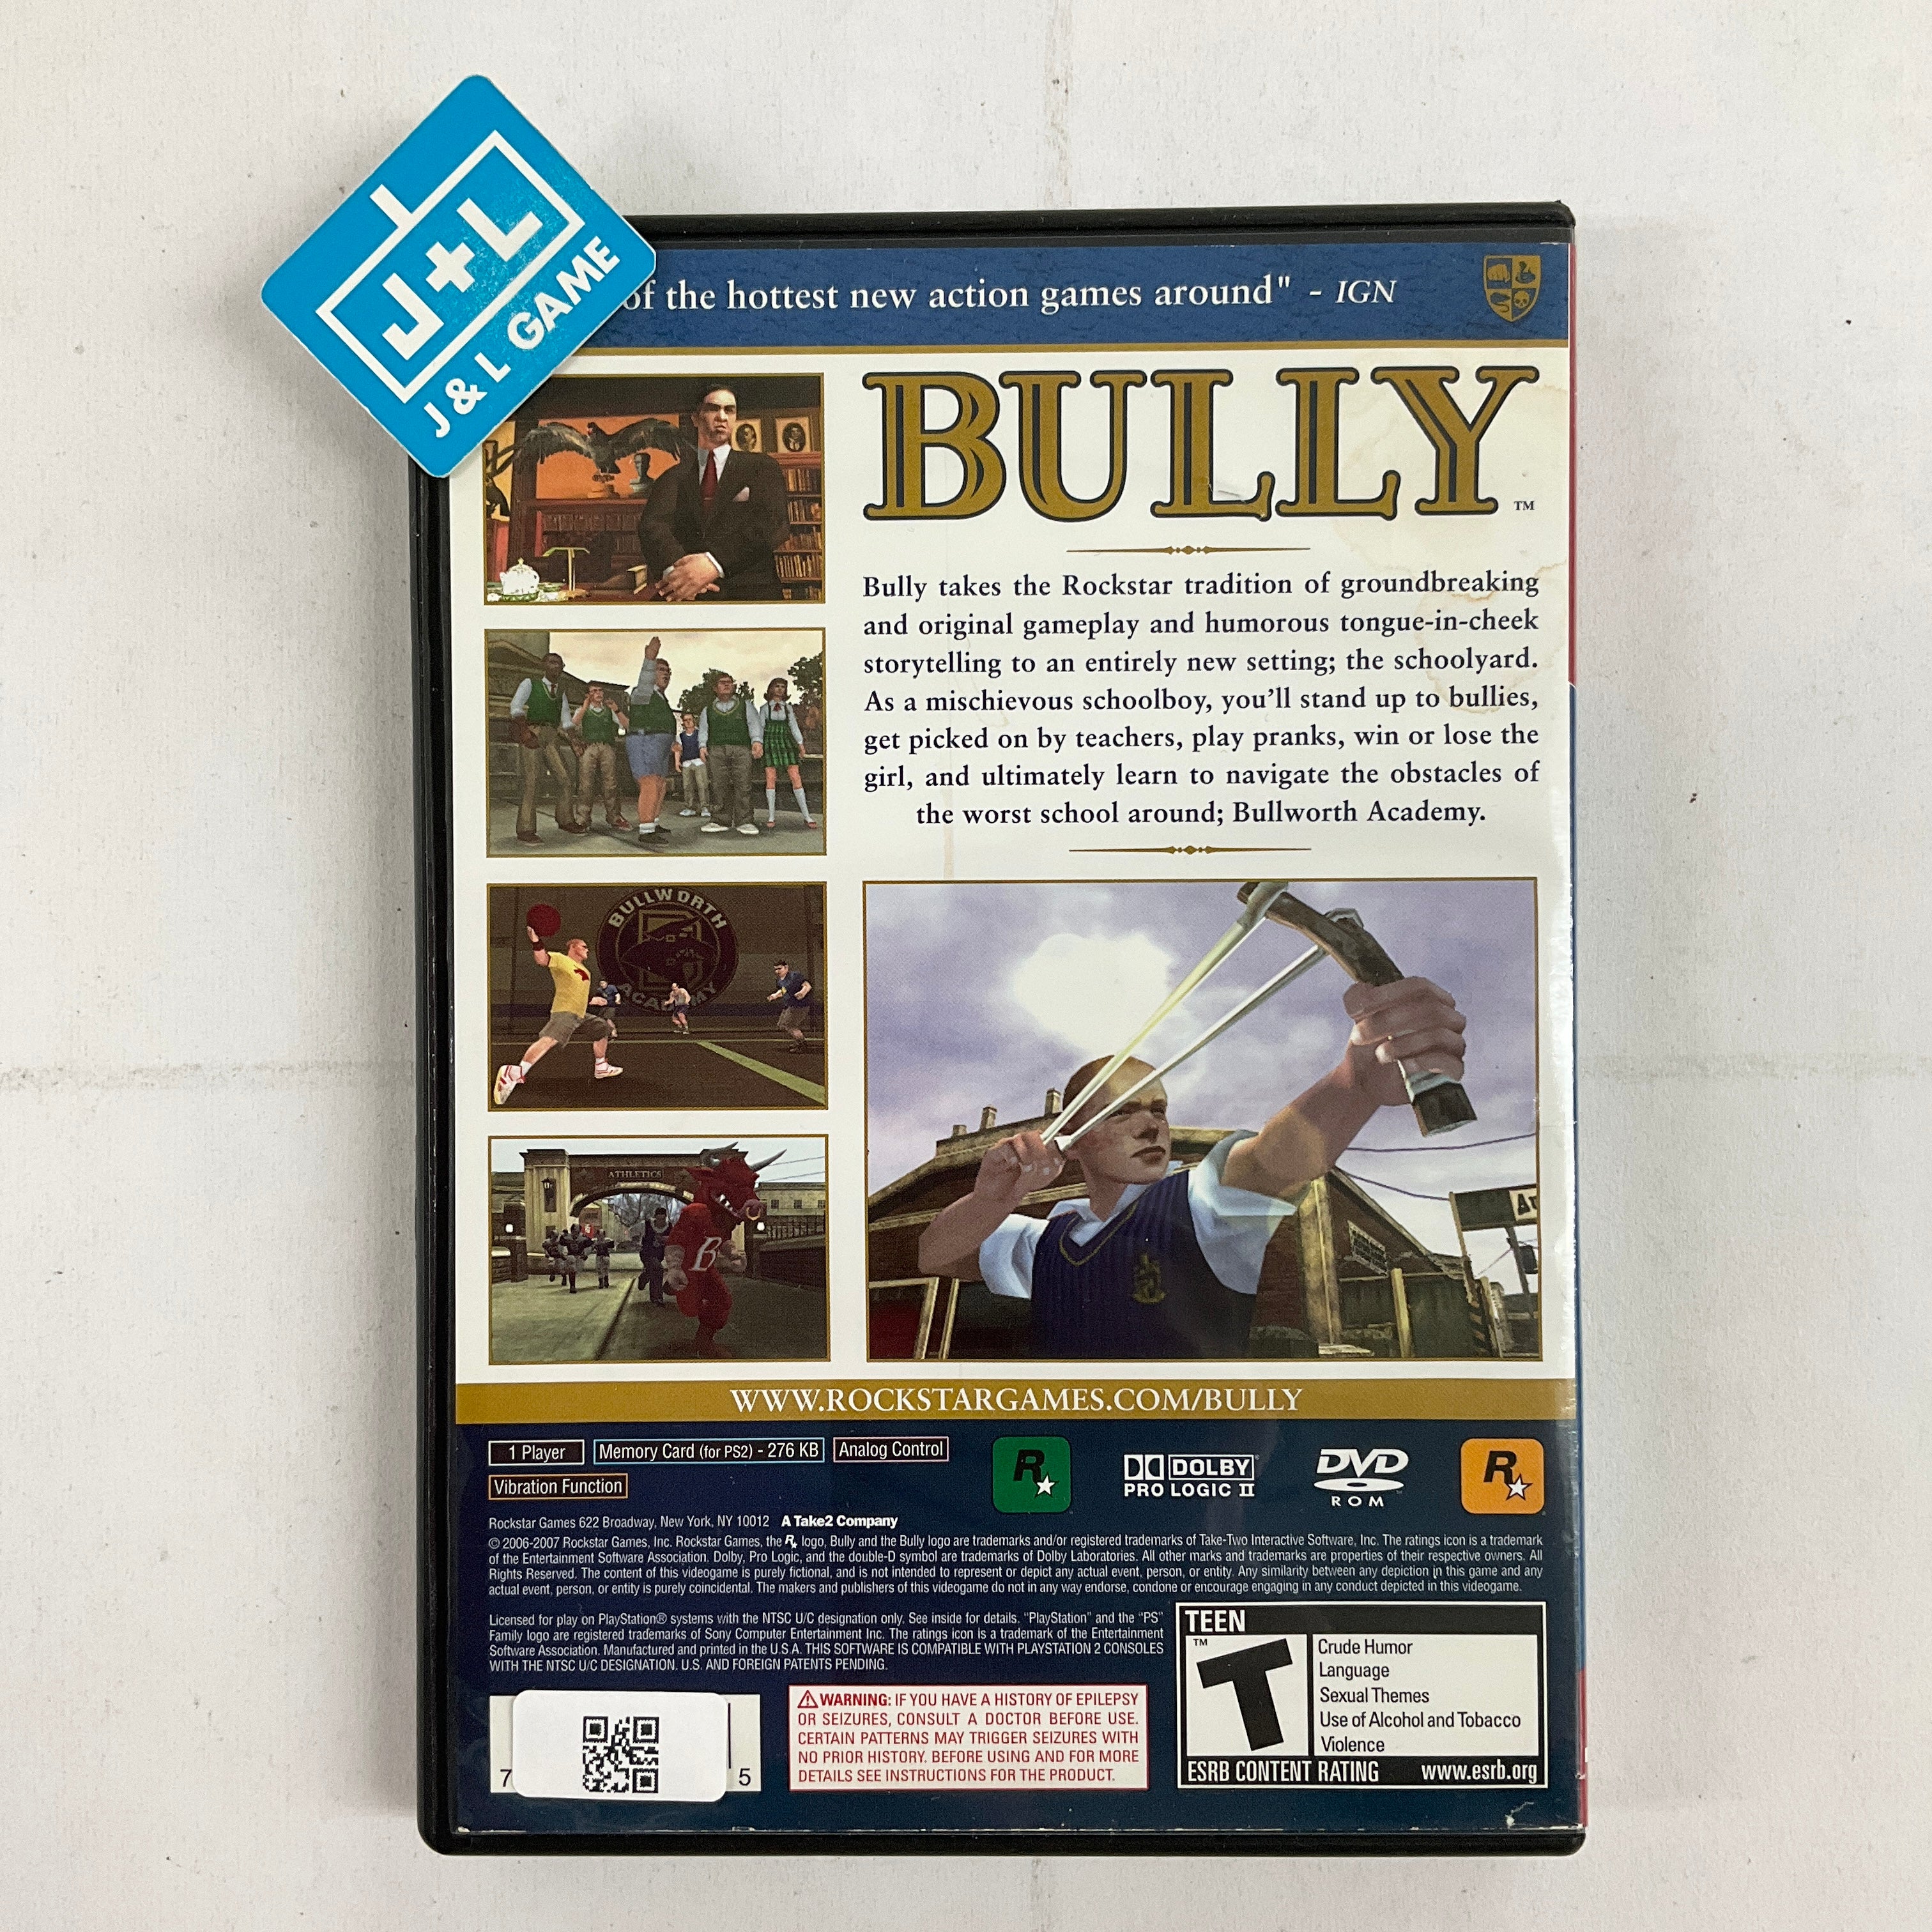 Bully (Greatest Hits) - (PS2) PlayStation 2 [Pre-Owned] Video Games Rockstar Games   